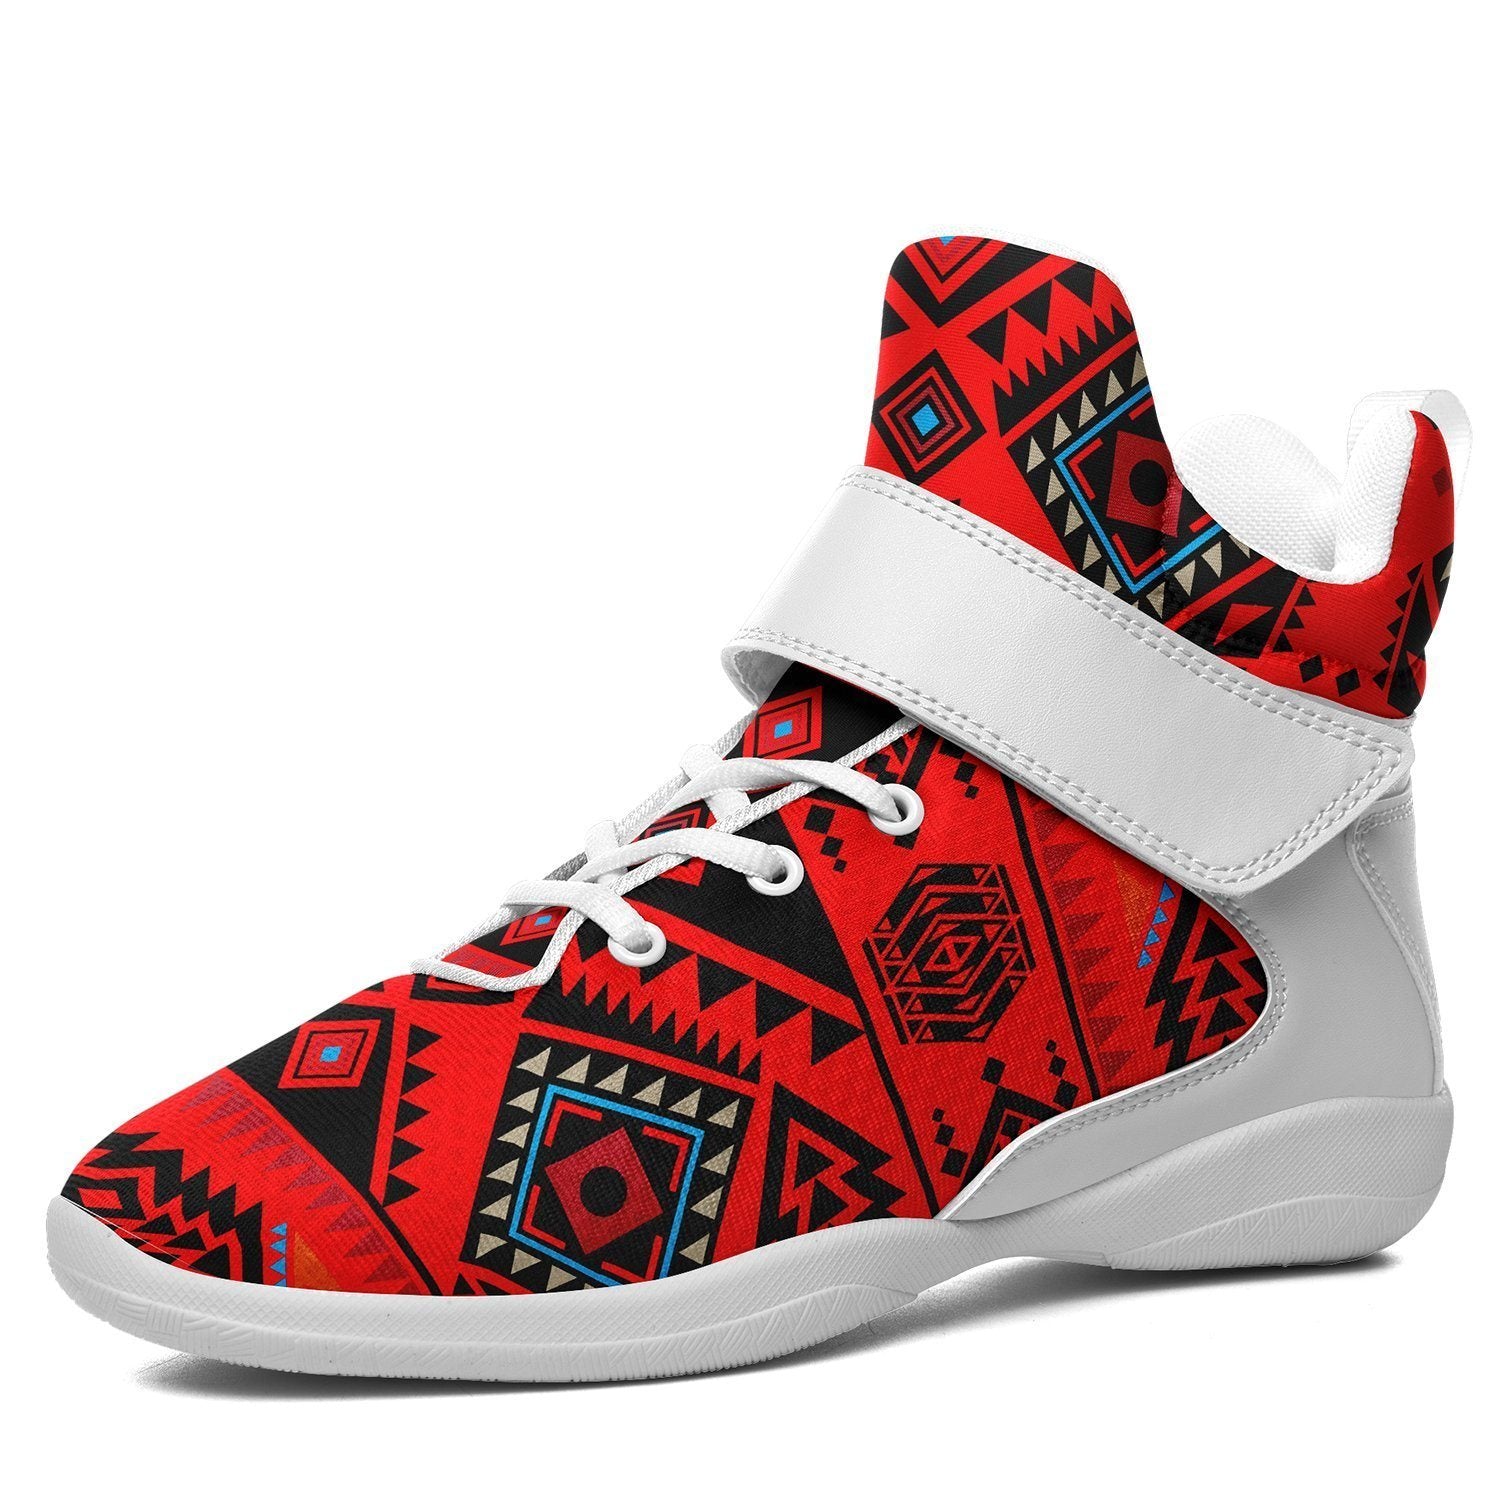 California Coast Mask Ipottaa Basketball / Sport High Top Shoes - White Sole 49 Dzine US Men 7 / EUR 40 White Sole with White Strap 